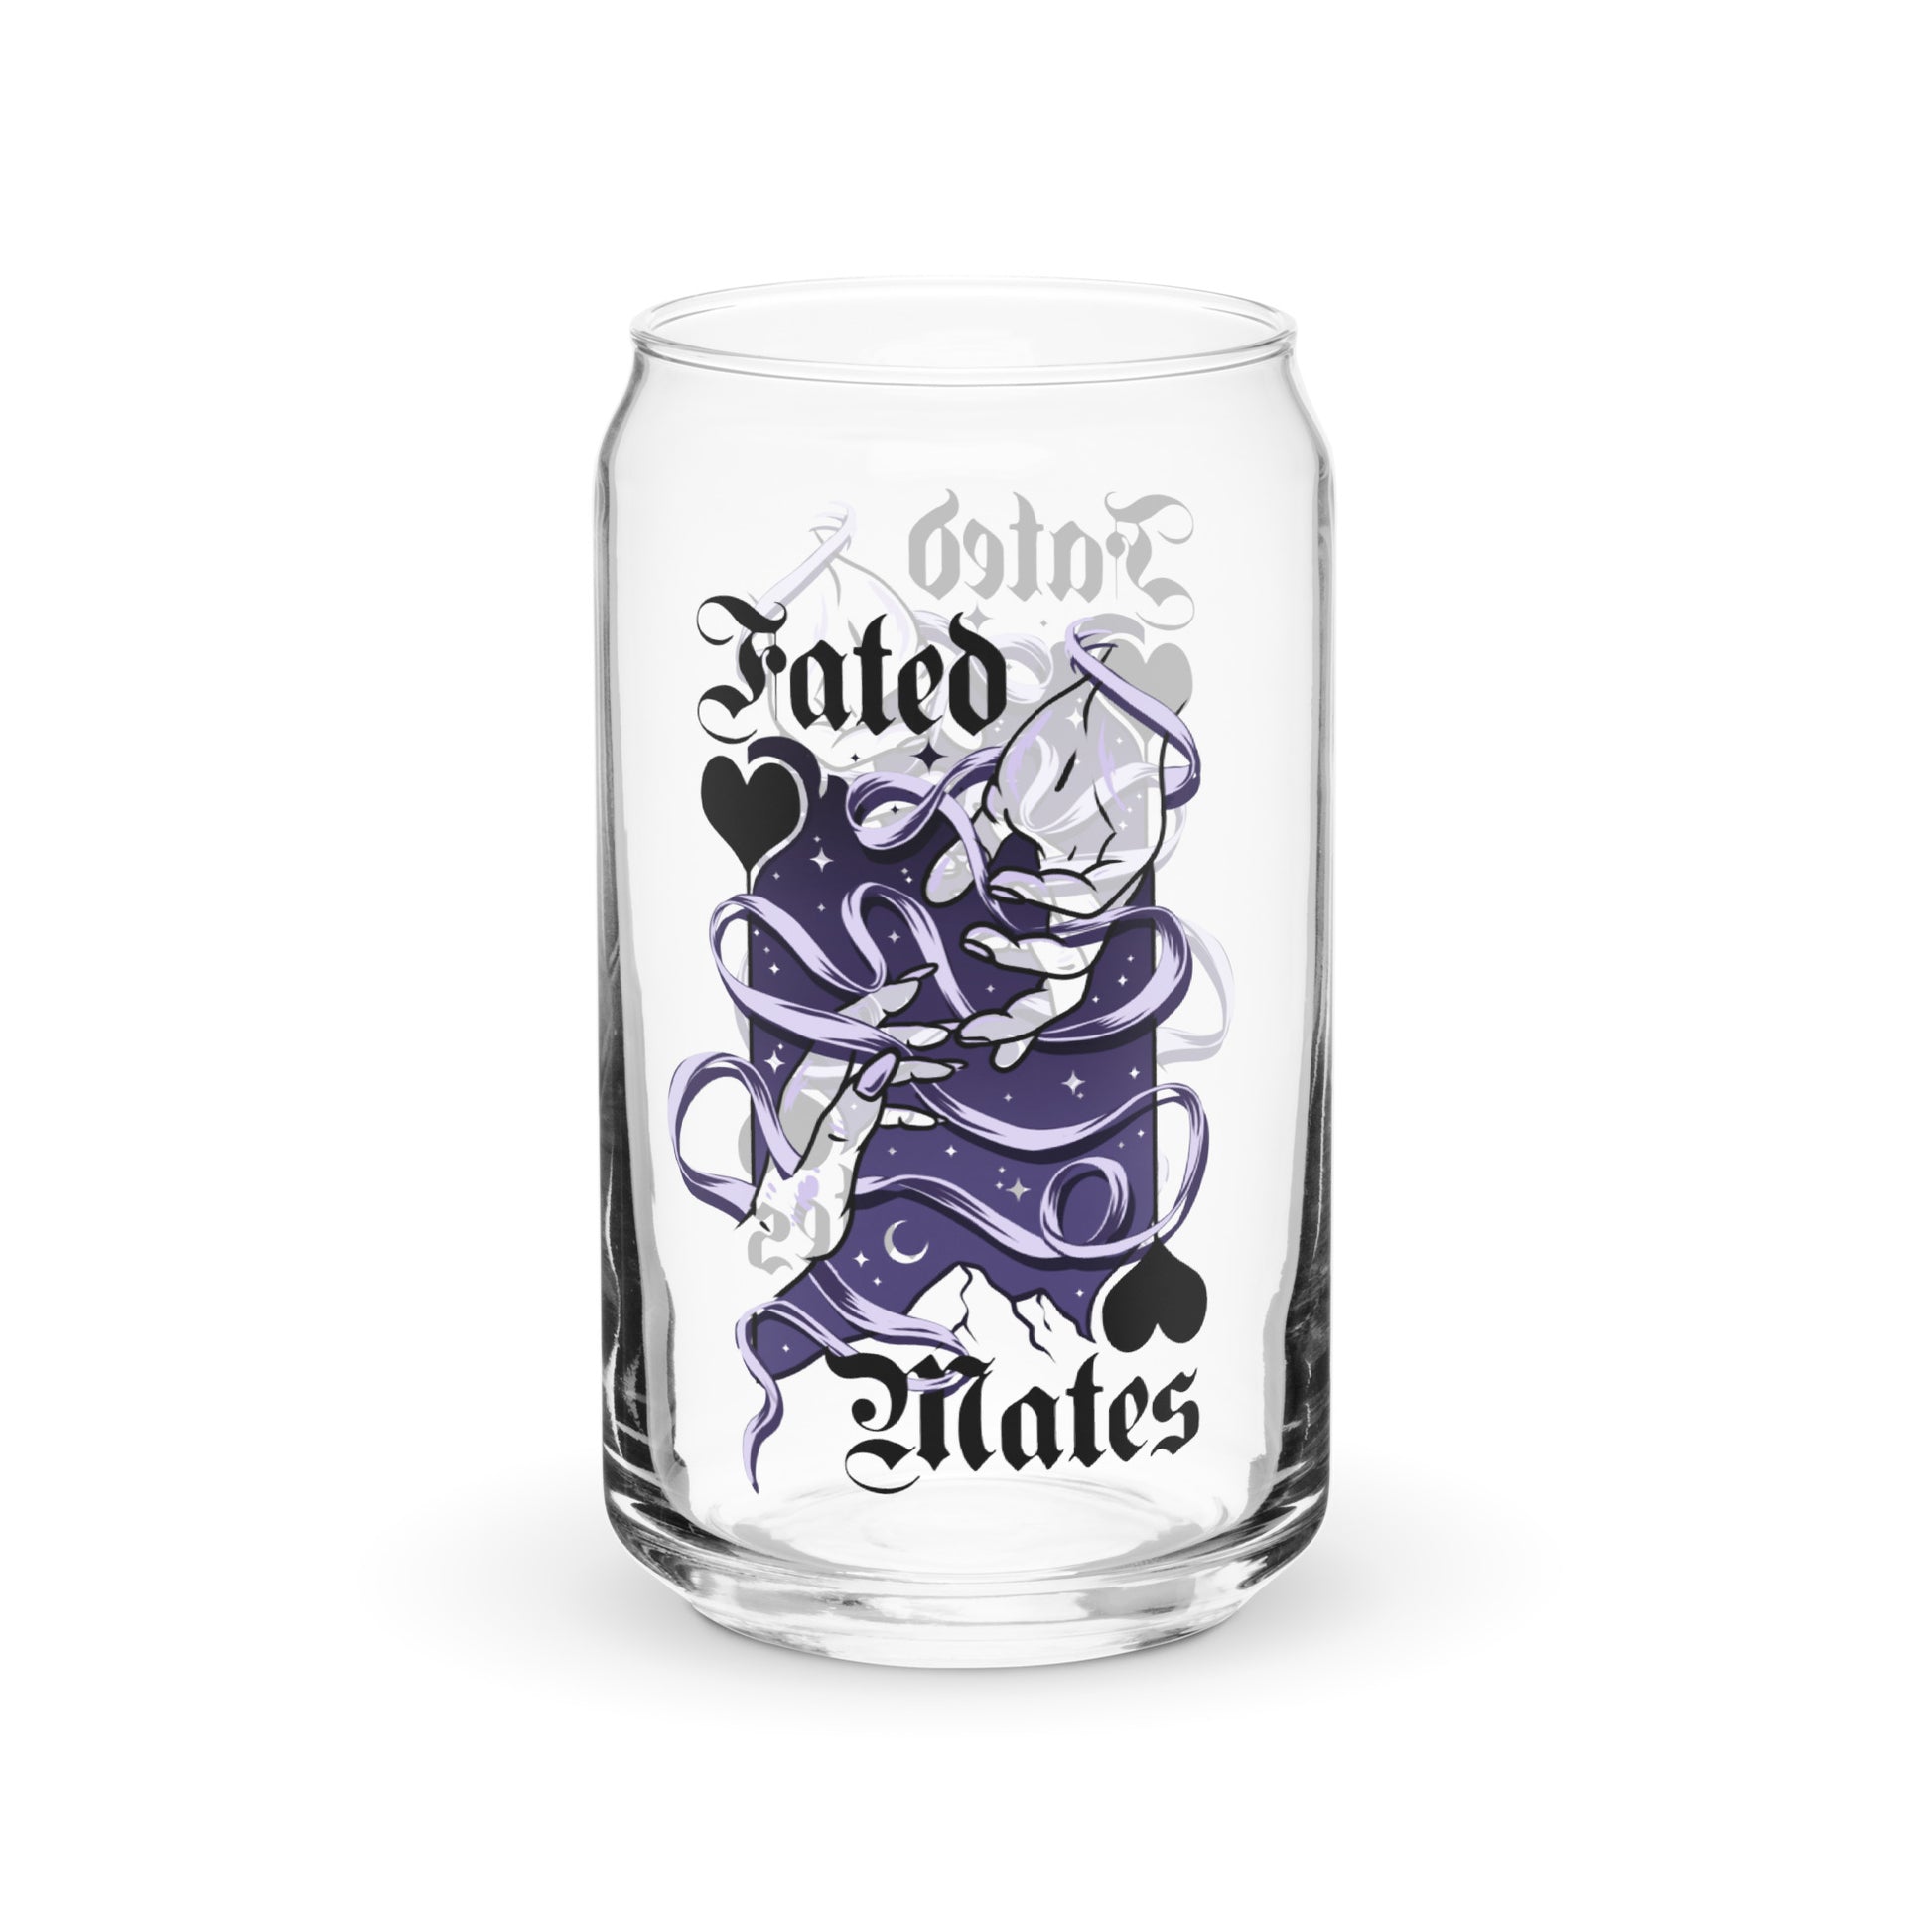 Fated Mates Can Glass | Tropes Merch